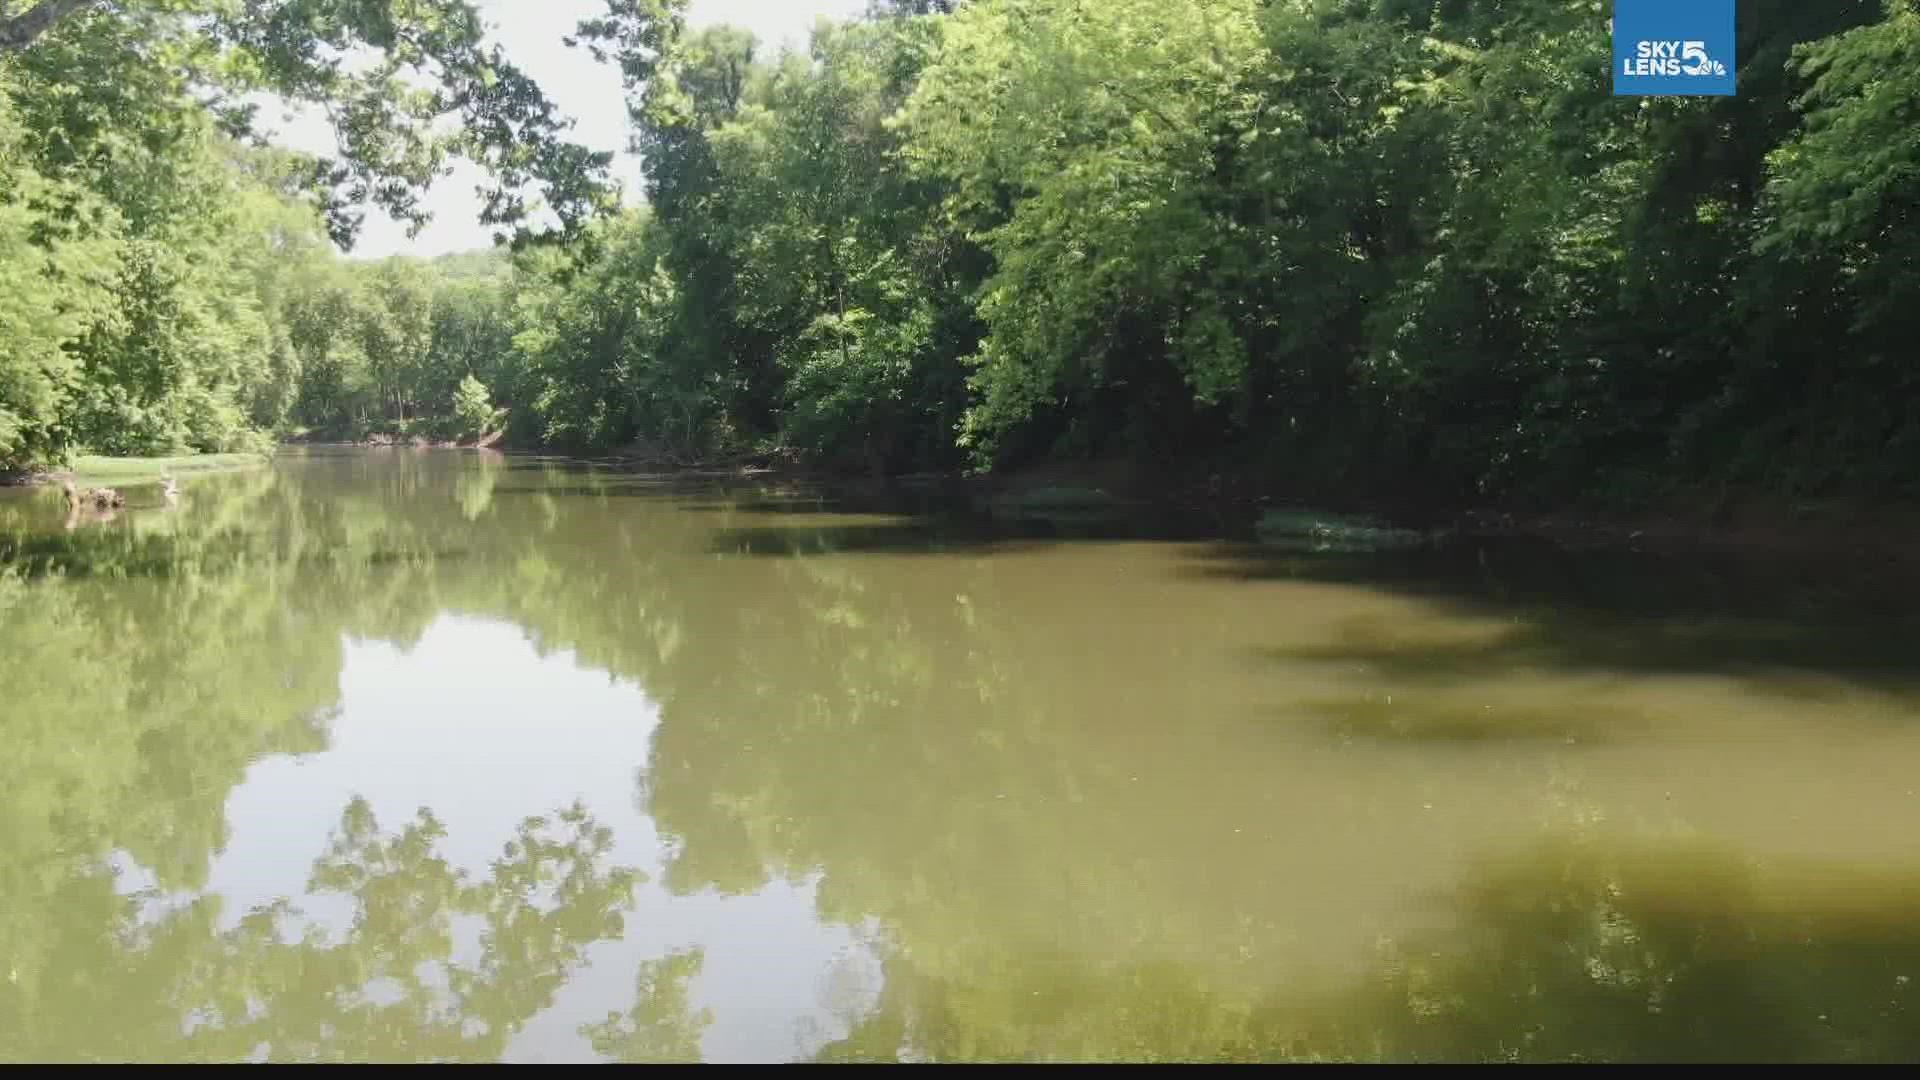 Police said a man pulled the girl from the river and two women performed CPR to get her breathing again.